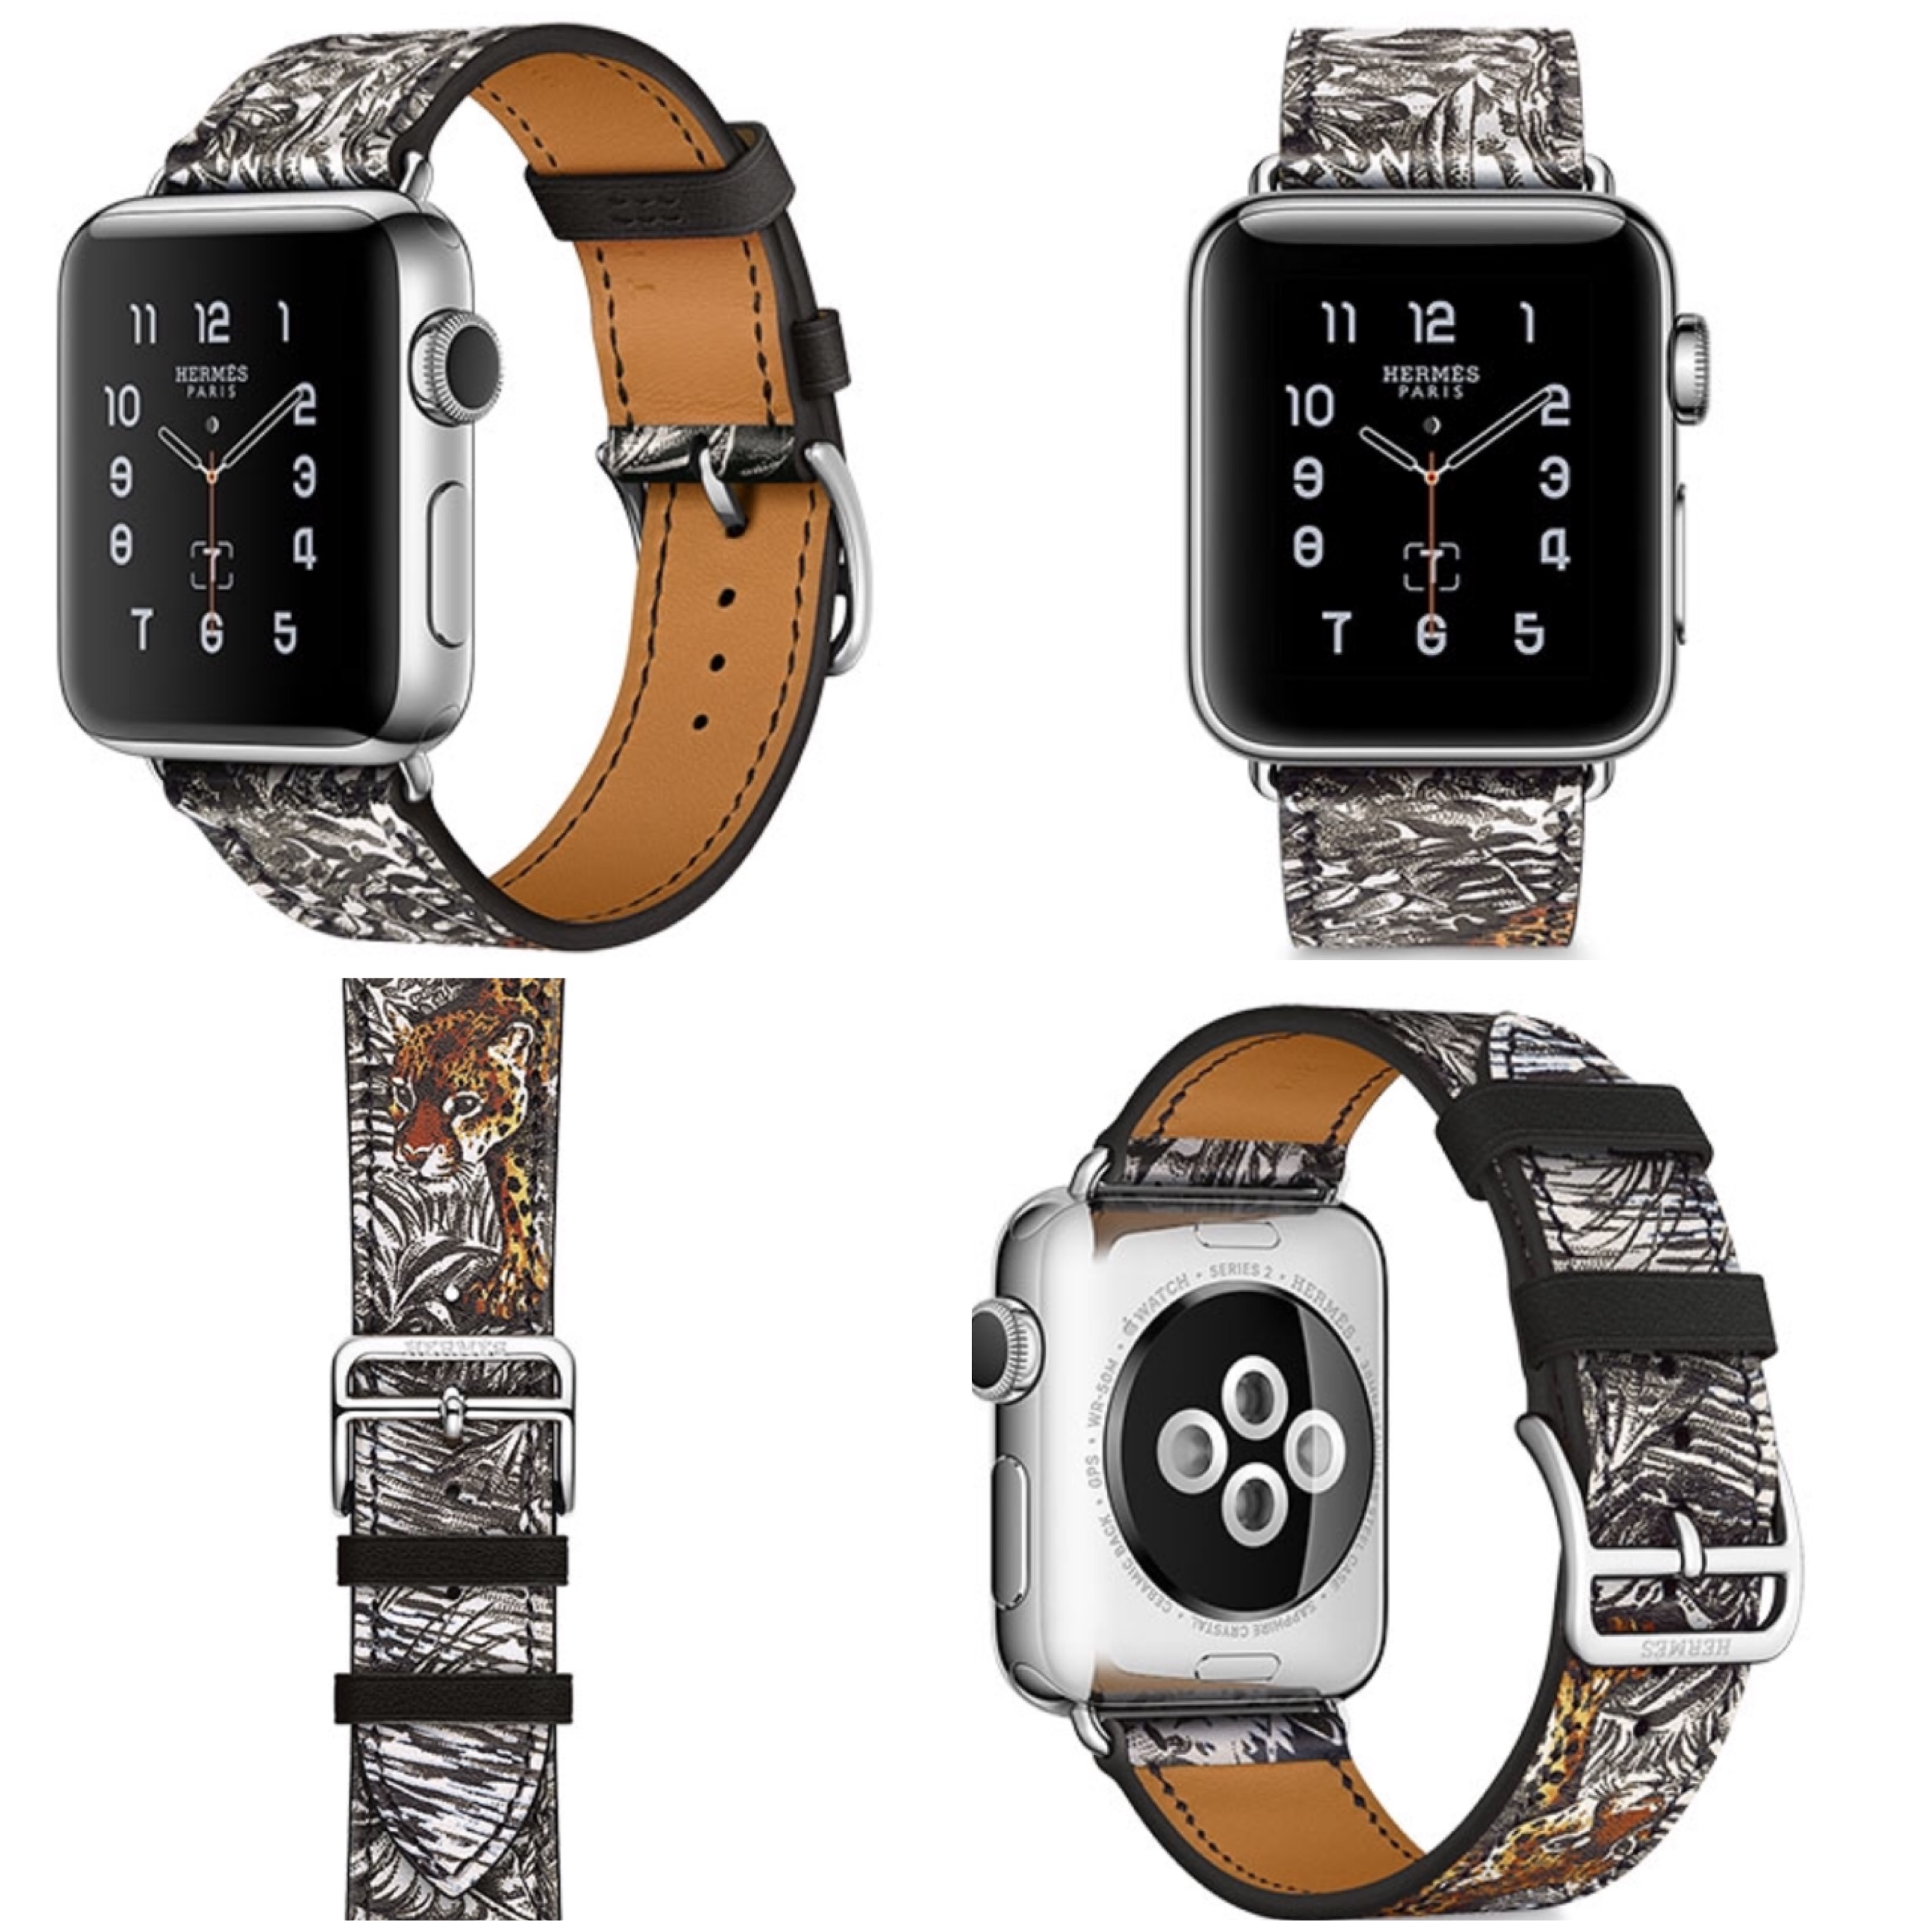 New Hermès Apple Watch Band Just Released | Watchaware